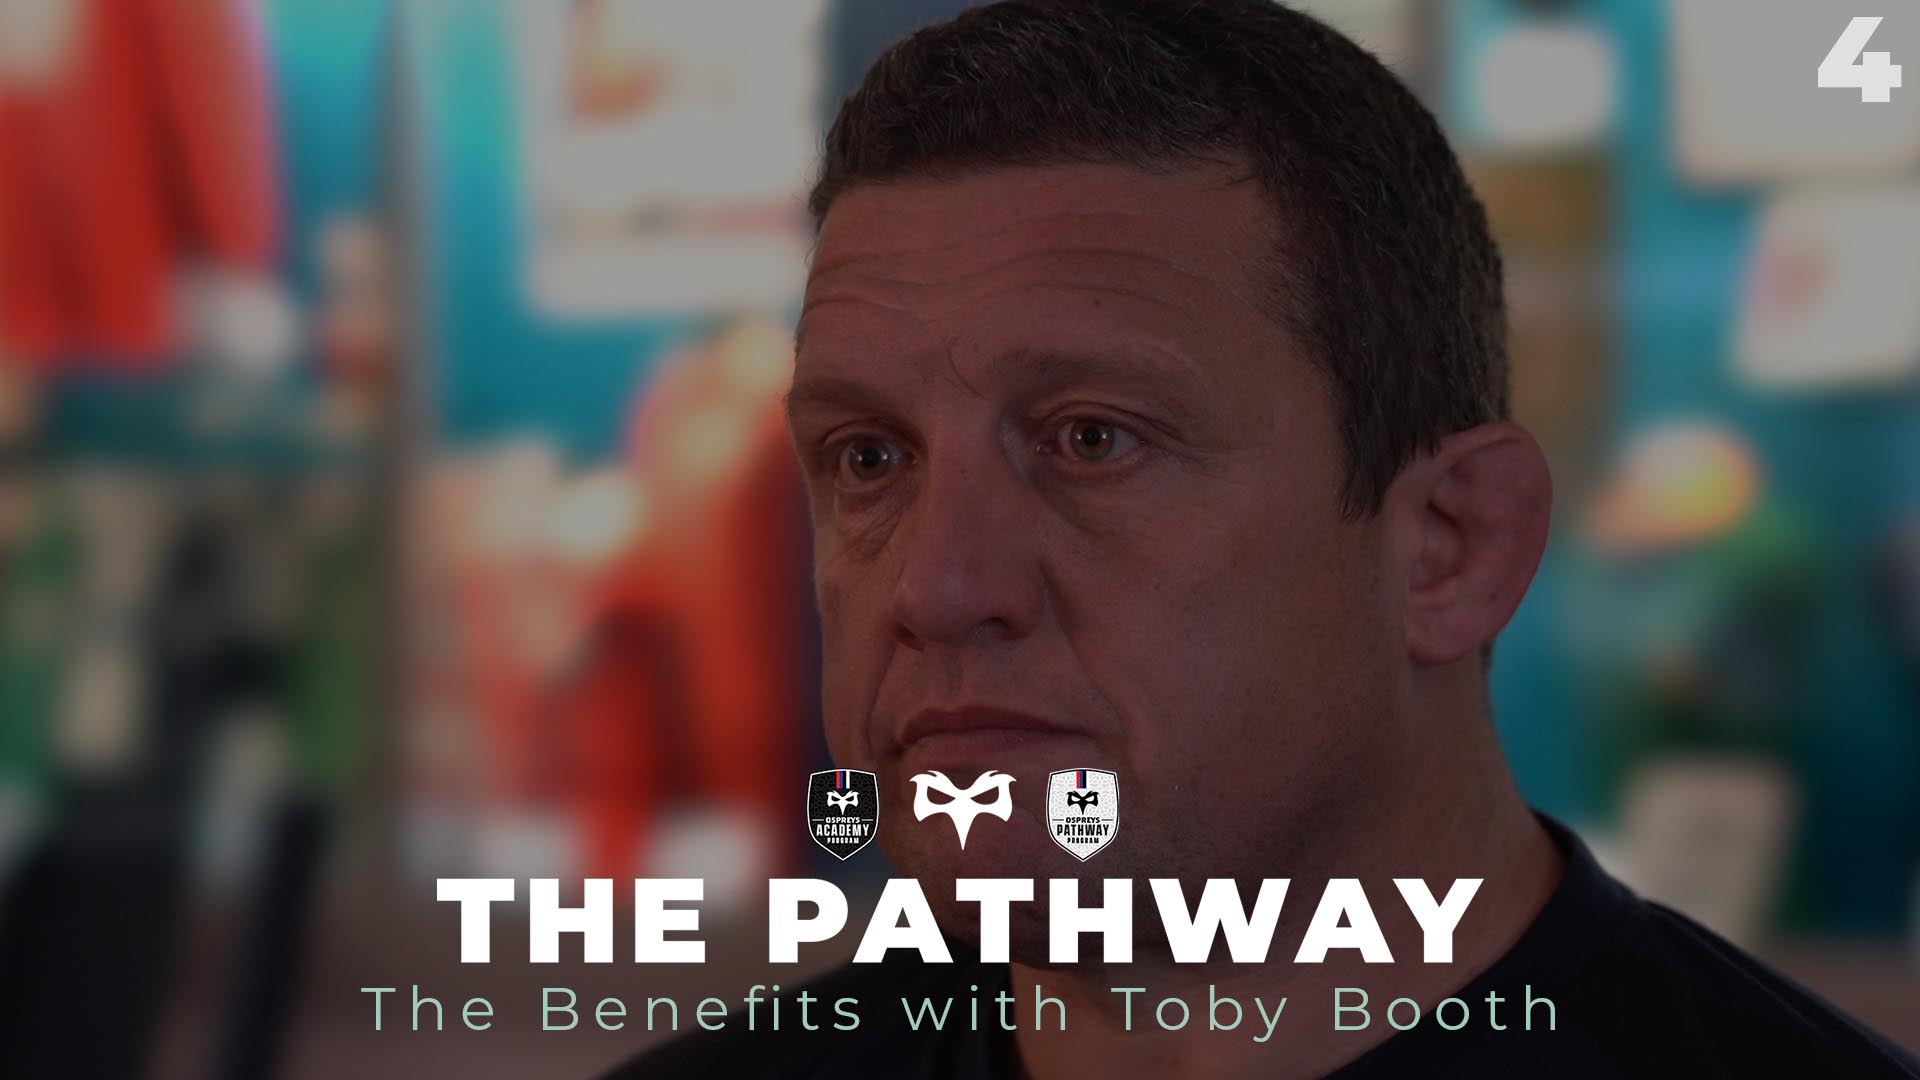 THE PATHWAY: #4 The Benefits with Toby Booth